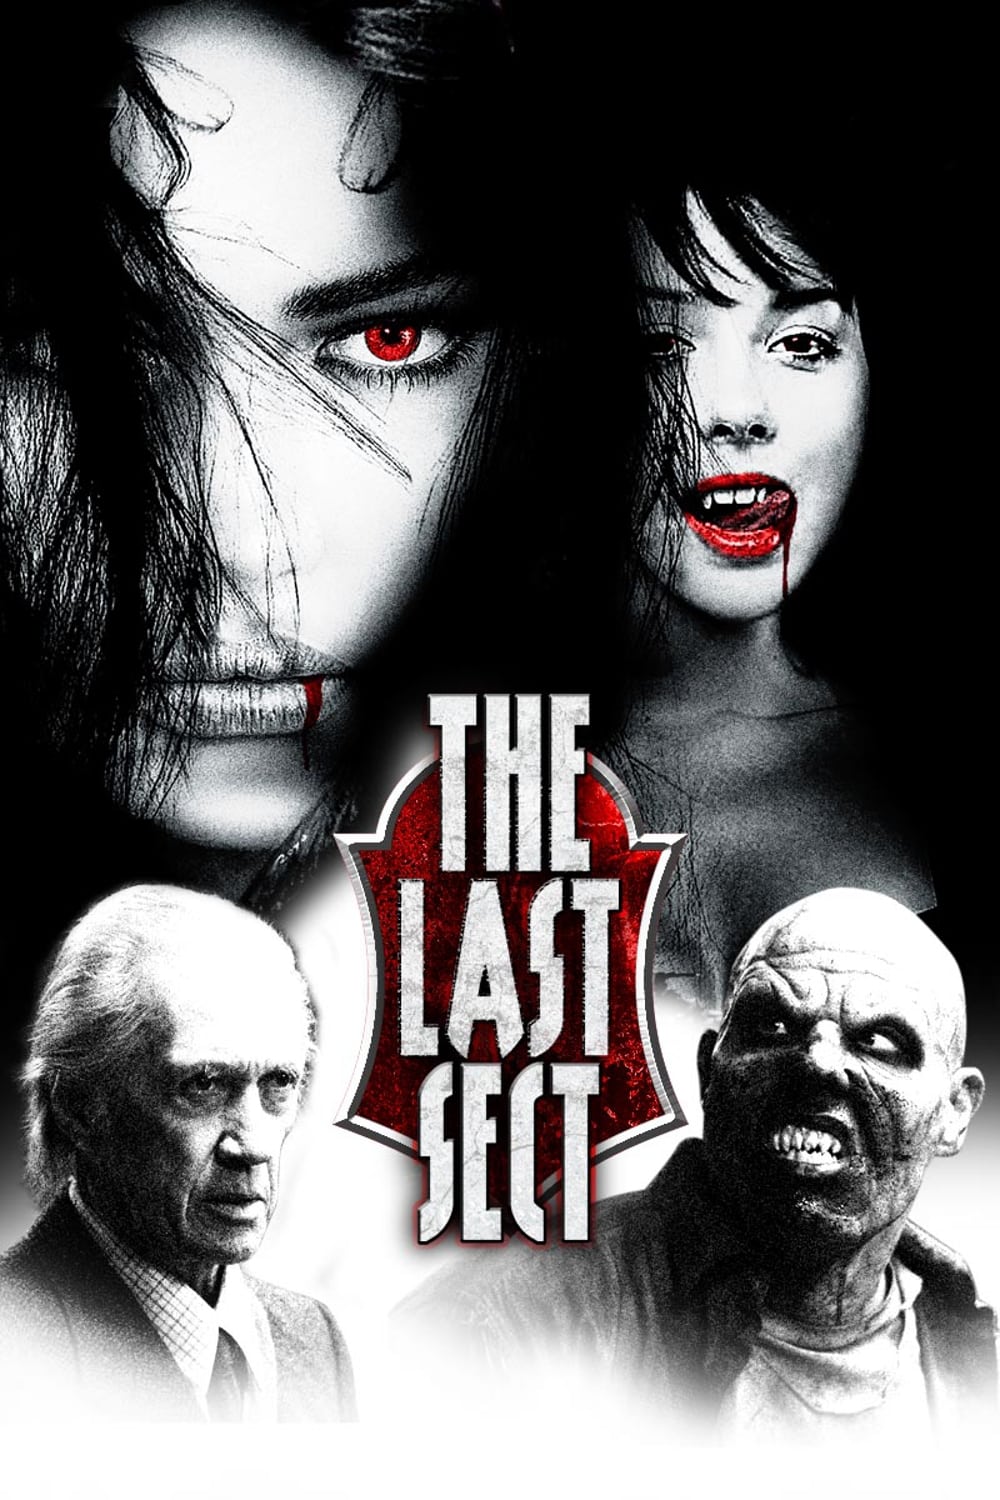 The Last Sect film